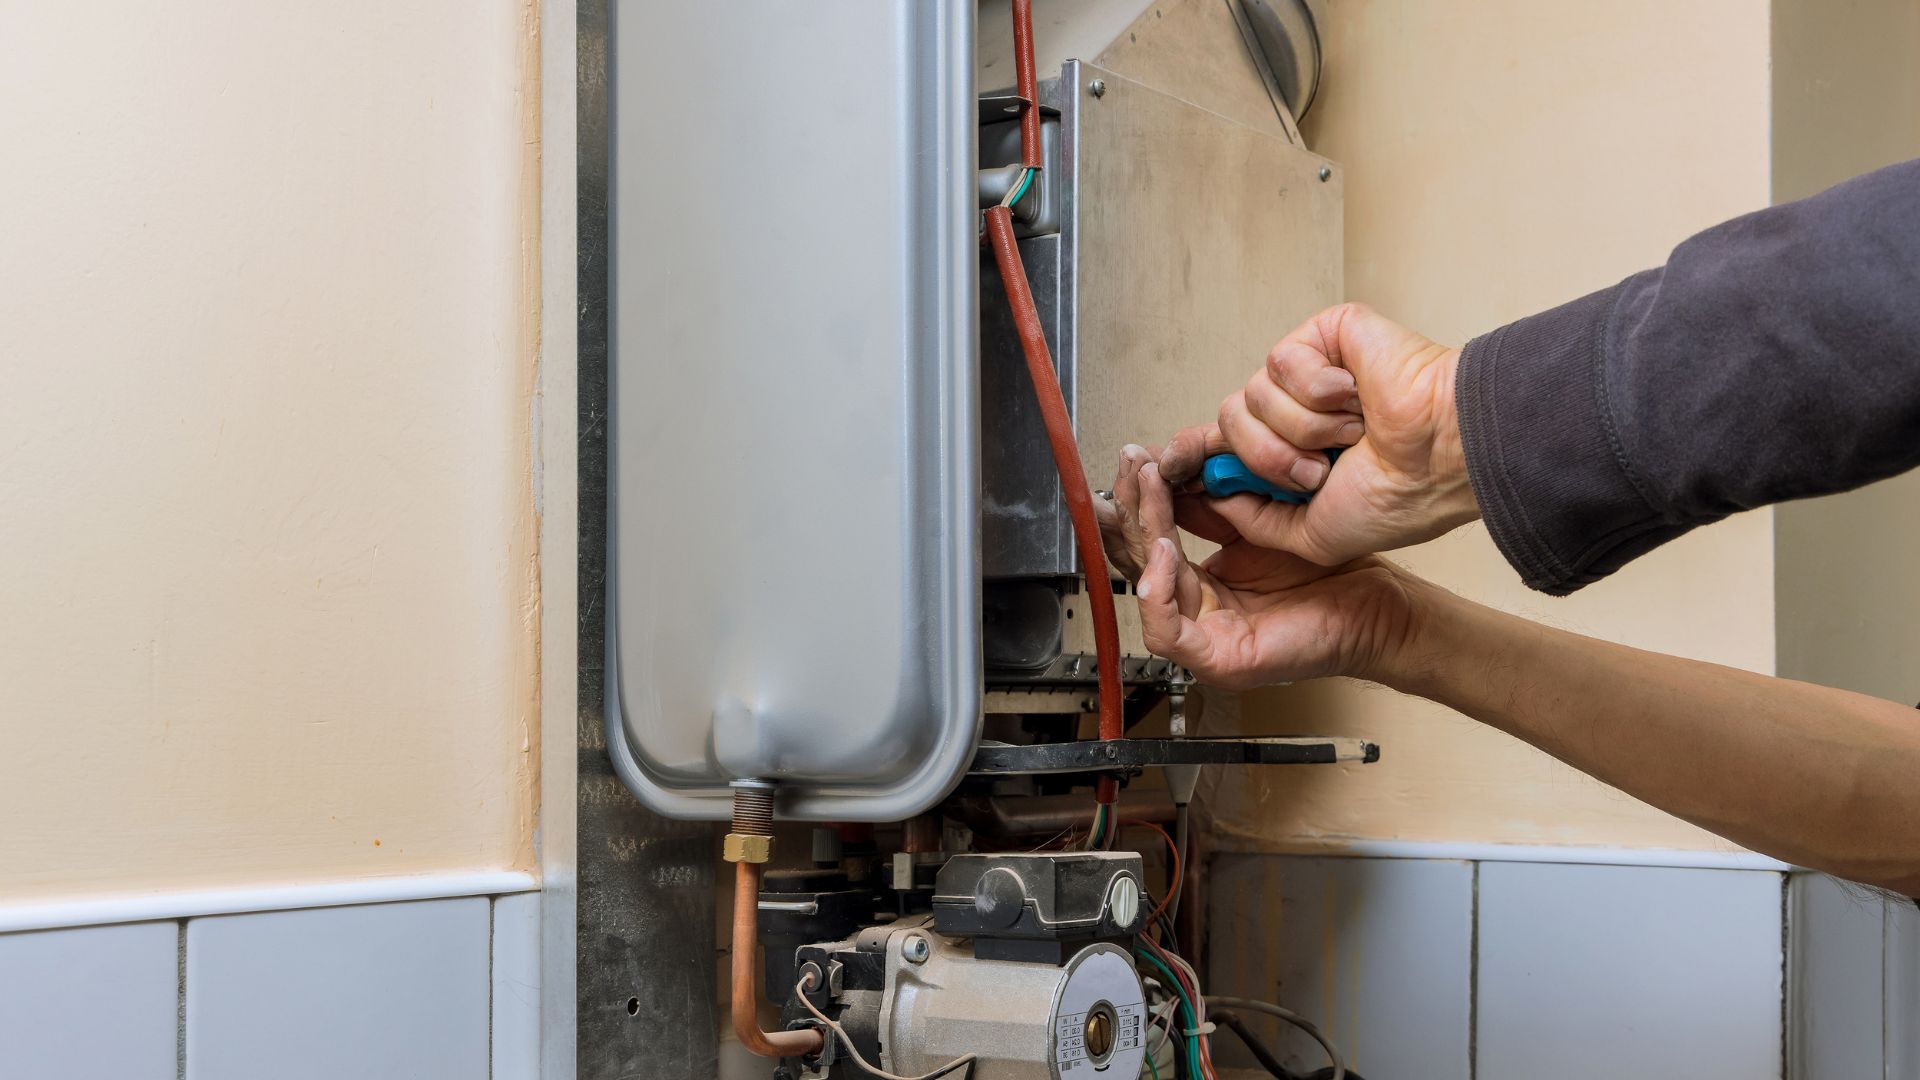 Replenish and restart your heater with precision, courtesy of our skilled team of plumbers.